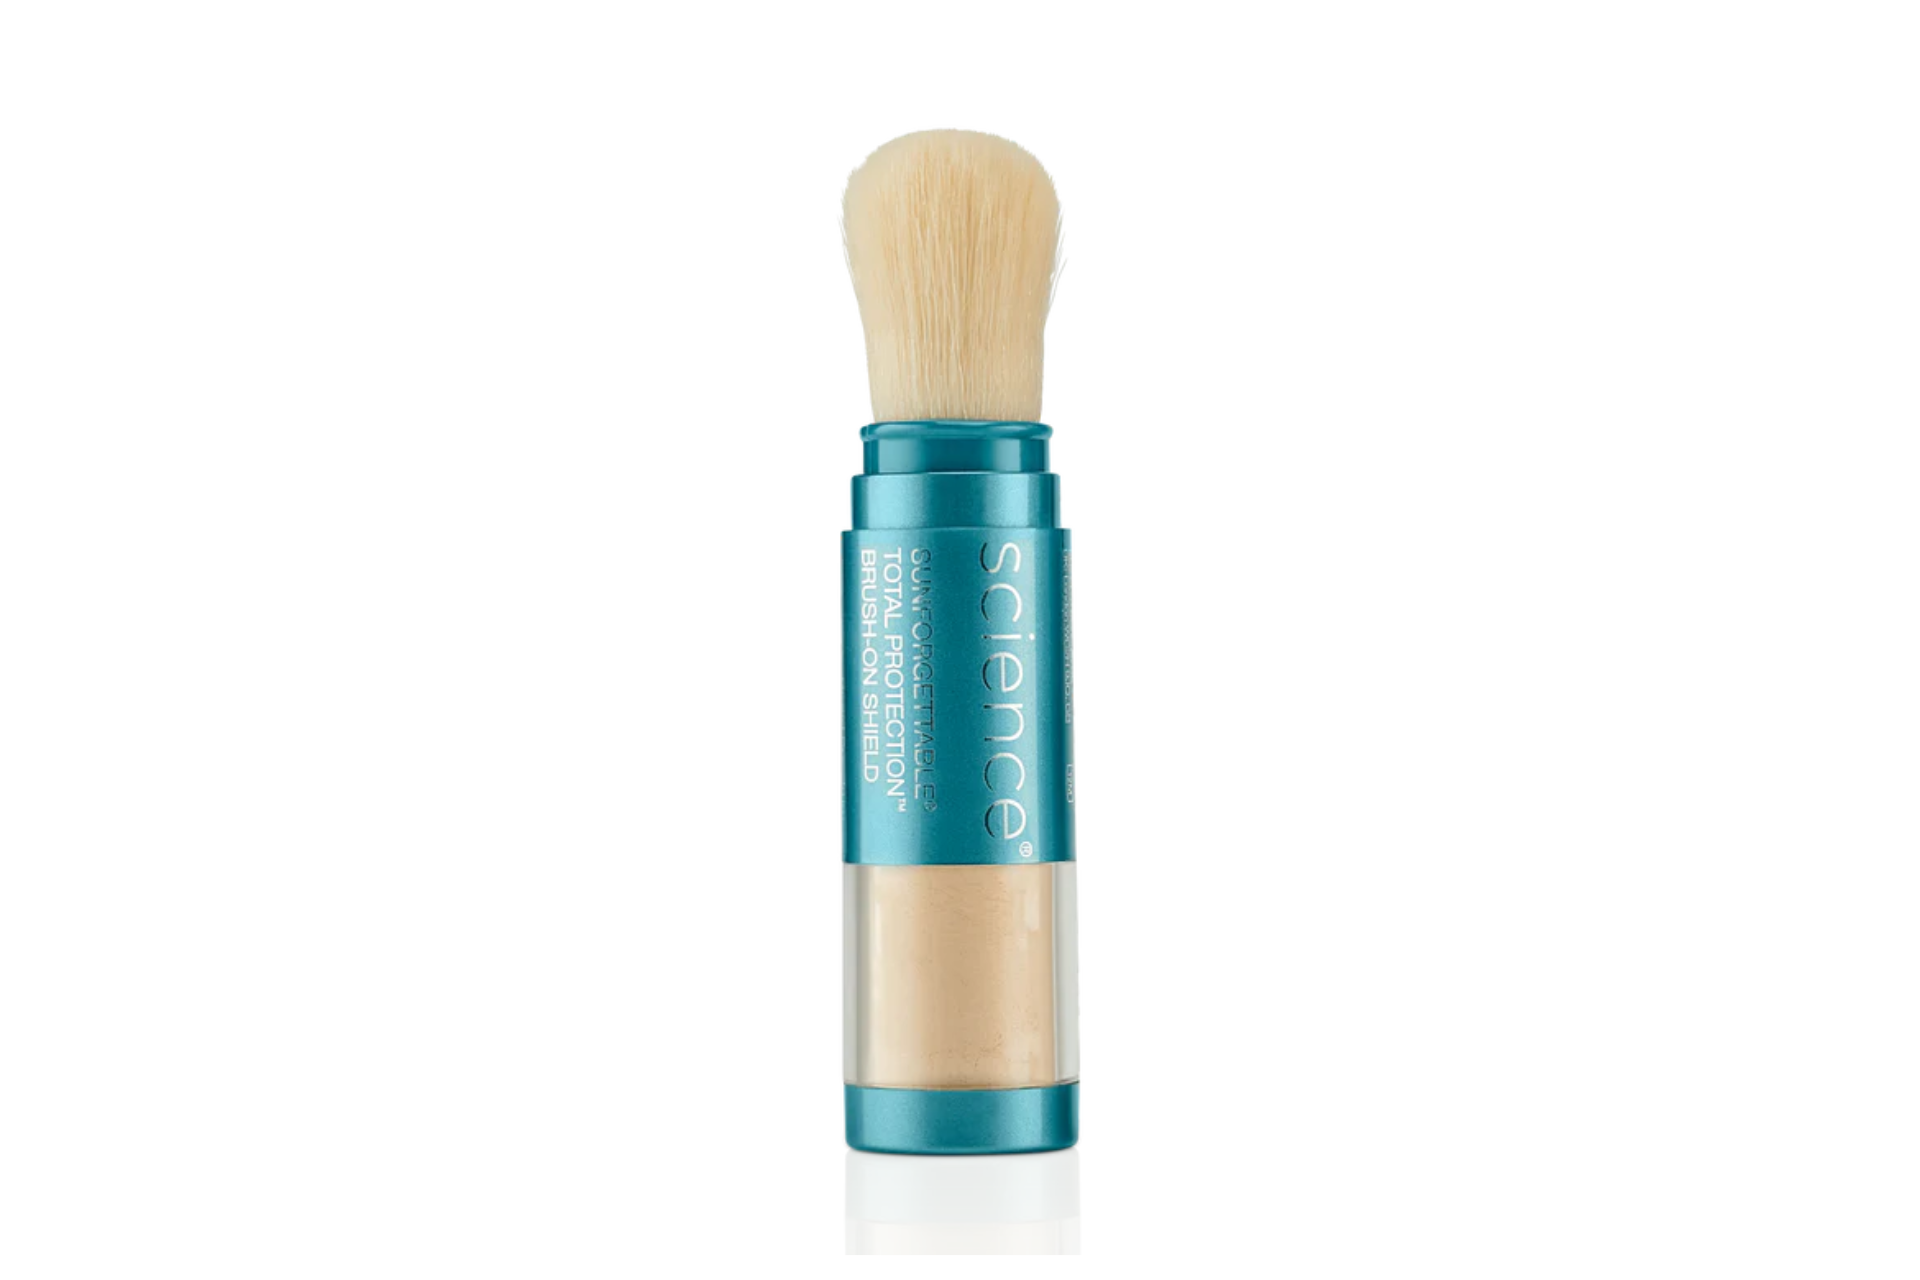  Colorescience Sunforgettable® Total Protection™ Brush on SPF 50